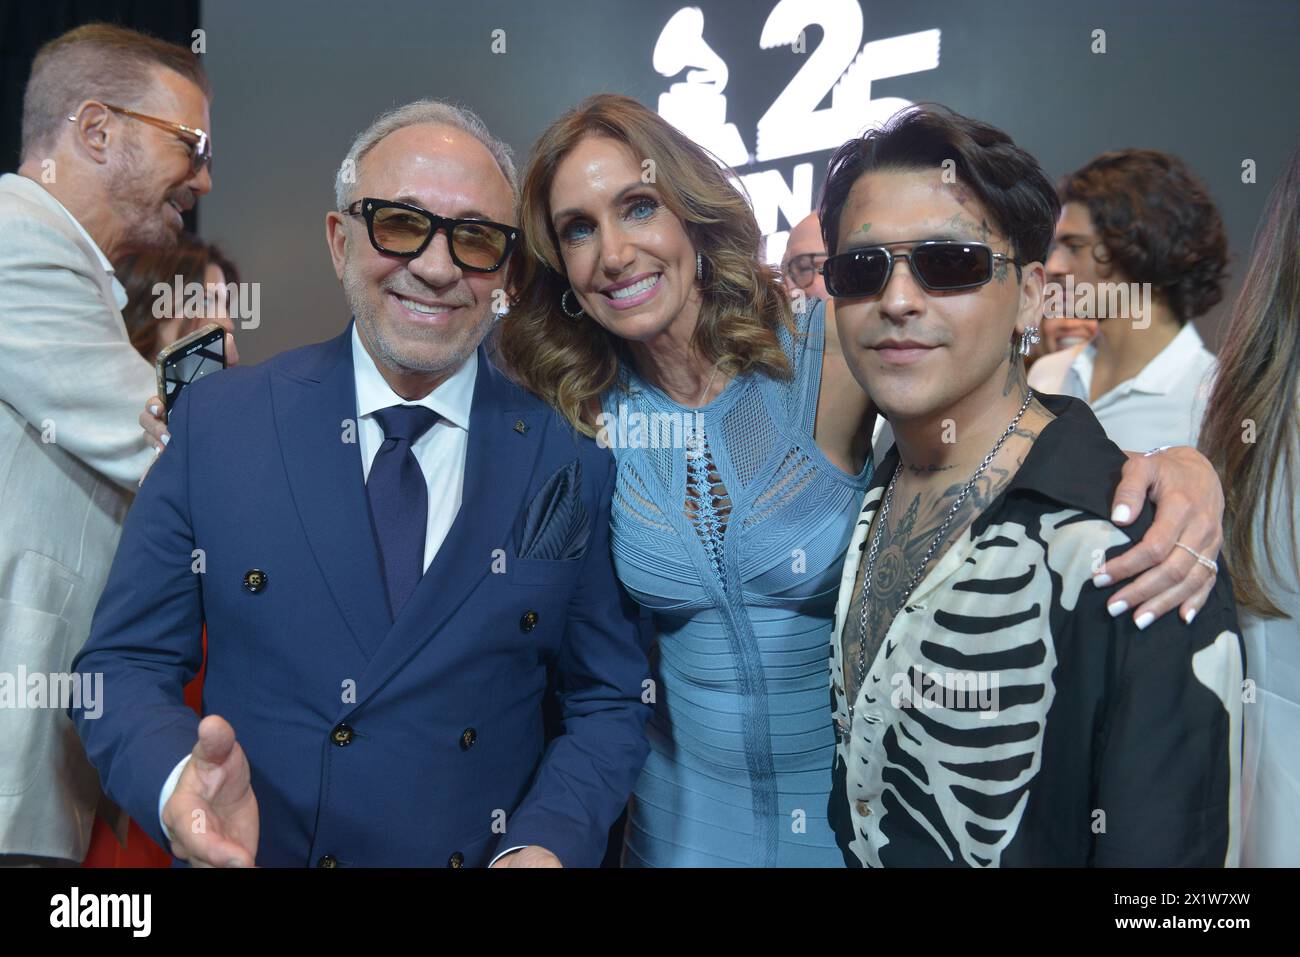 MIAMI, FLORIDA - APRIL 17: Willy Chirino, Emilio Estefan, Lili Estefan and Christian Nodal attend the 25th Annual Latin GRAMMY Awards® Official Announcement on April 17, 2024 in Miami, Florida.  (Photo by JL/Sipa USA) Stock Photo